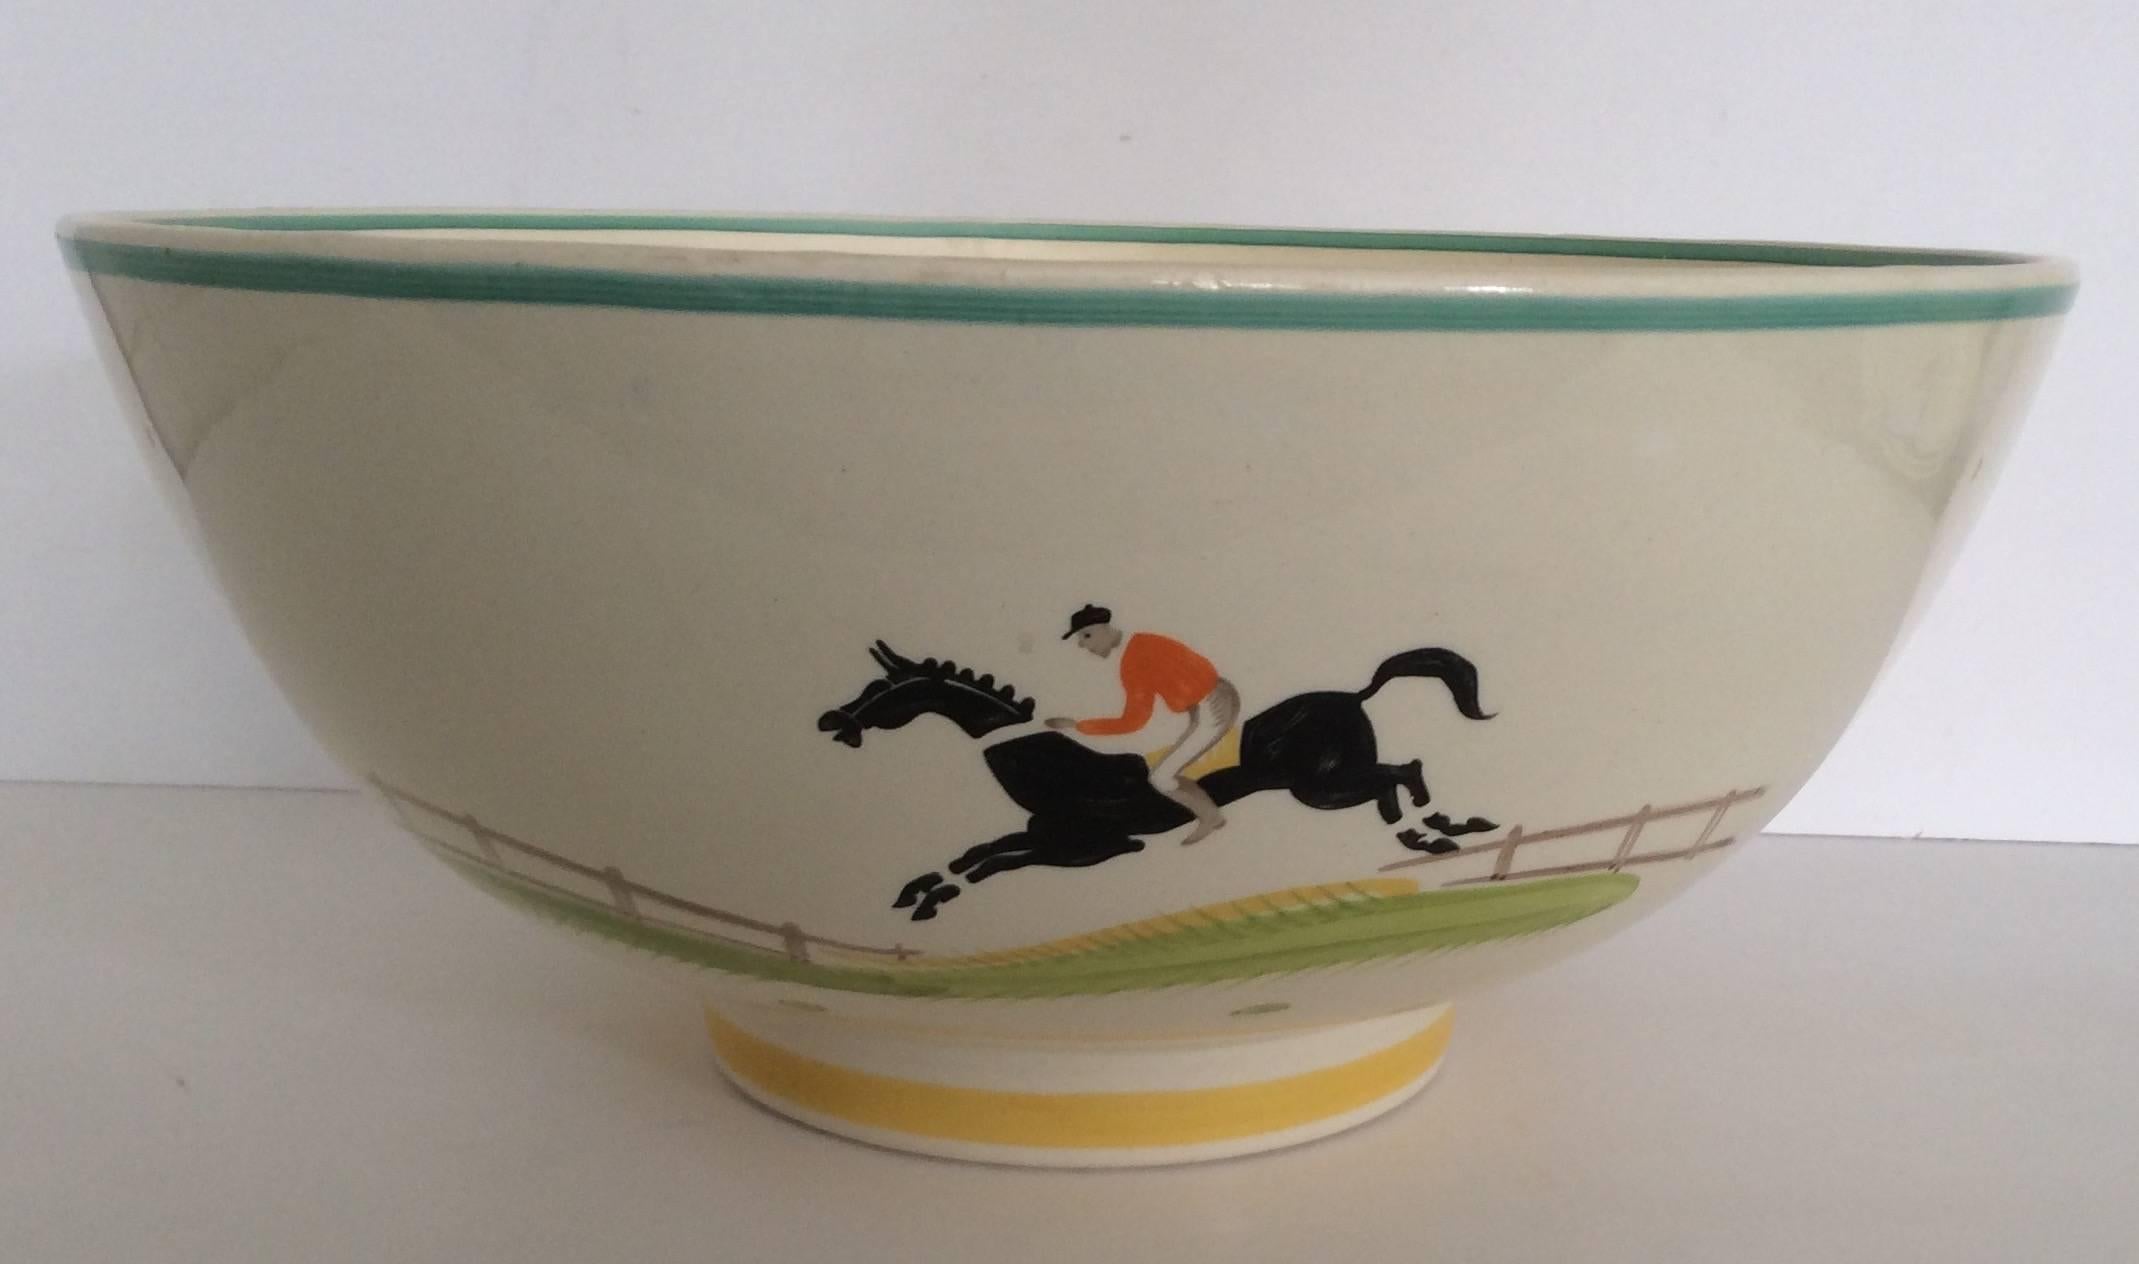 A large Susie Cooper punch bowl with a hand-painted design of horse and Jockey.
Susie Cooper hand-painted designs of this calibre are very rare and this example is offered in excellent condition.
Measure: HWD 14.5 cm, 31.5 cm, 31.5 cm,
British,